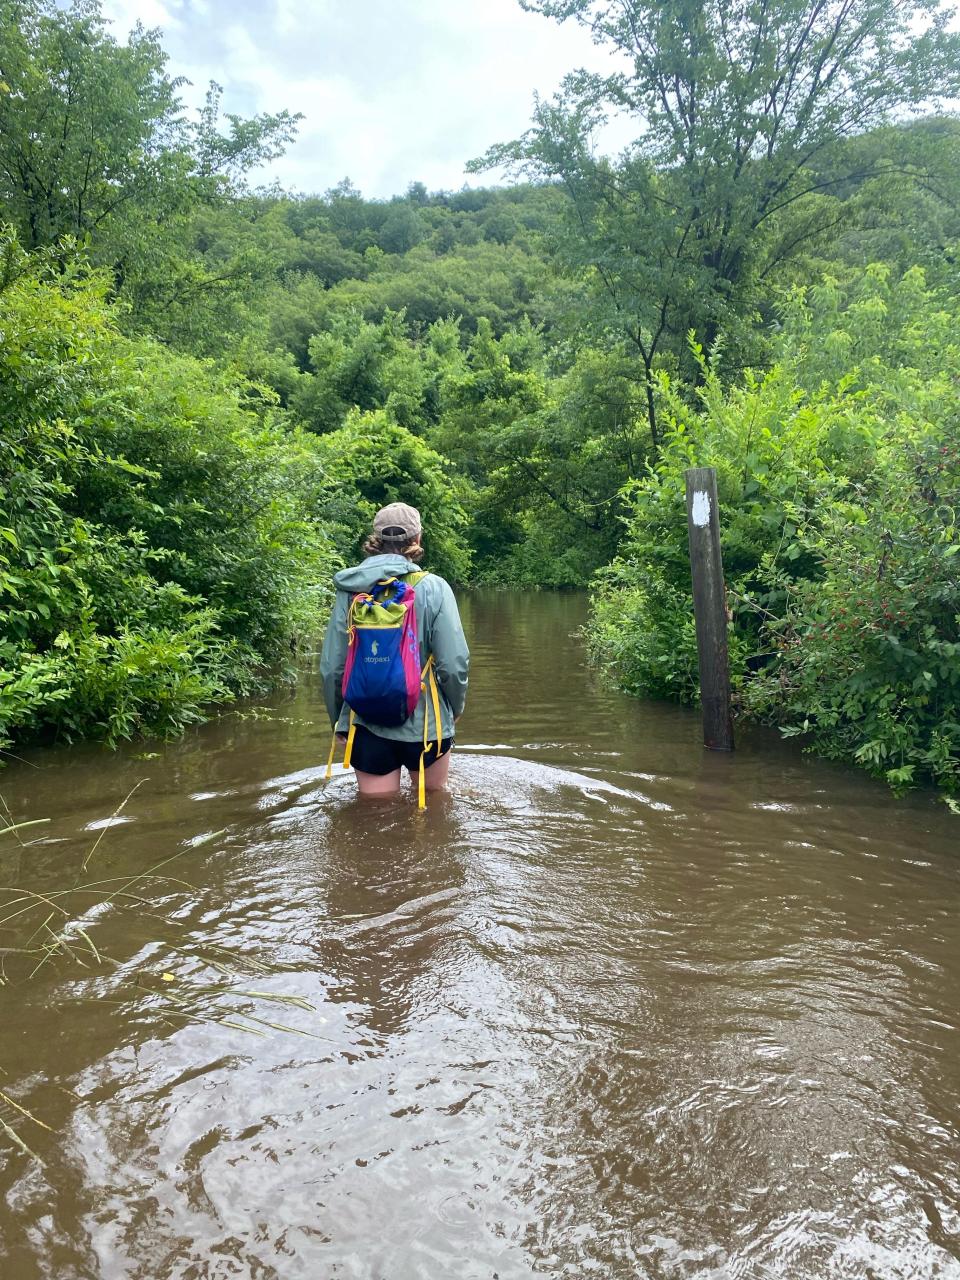 Alexis Holzmann wades through murky water near the Housatonic River in Connecticut as parts of the Appalachian Trail she is hiking were flooded after the storms July 9-10.